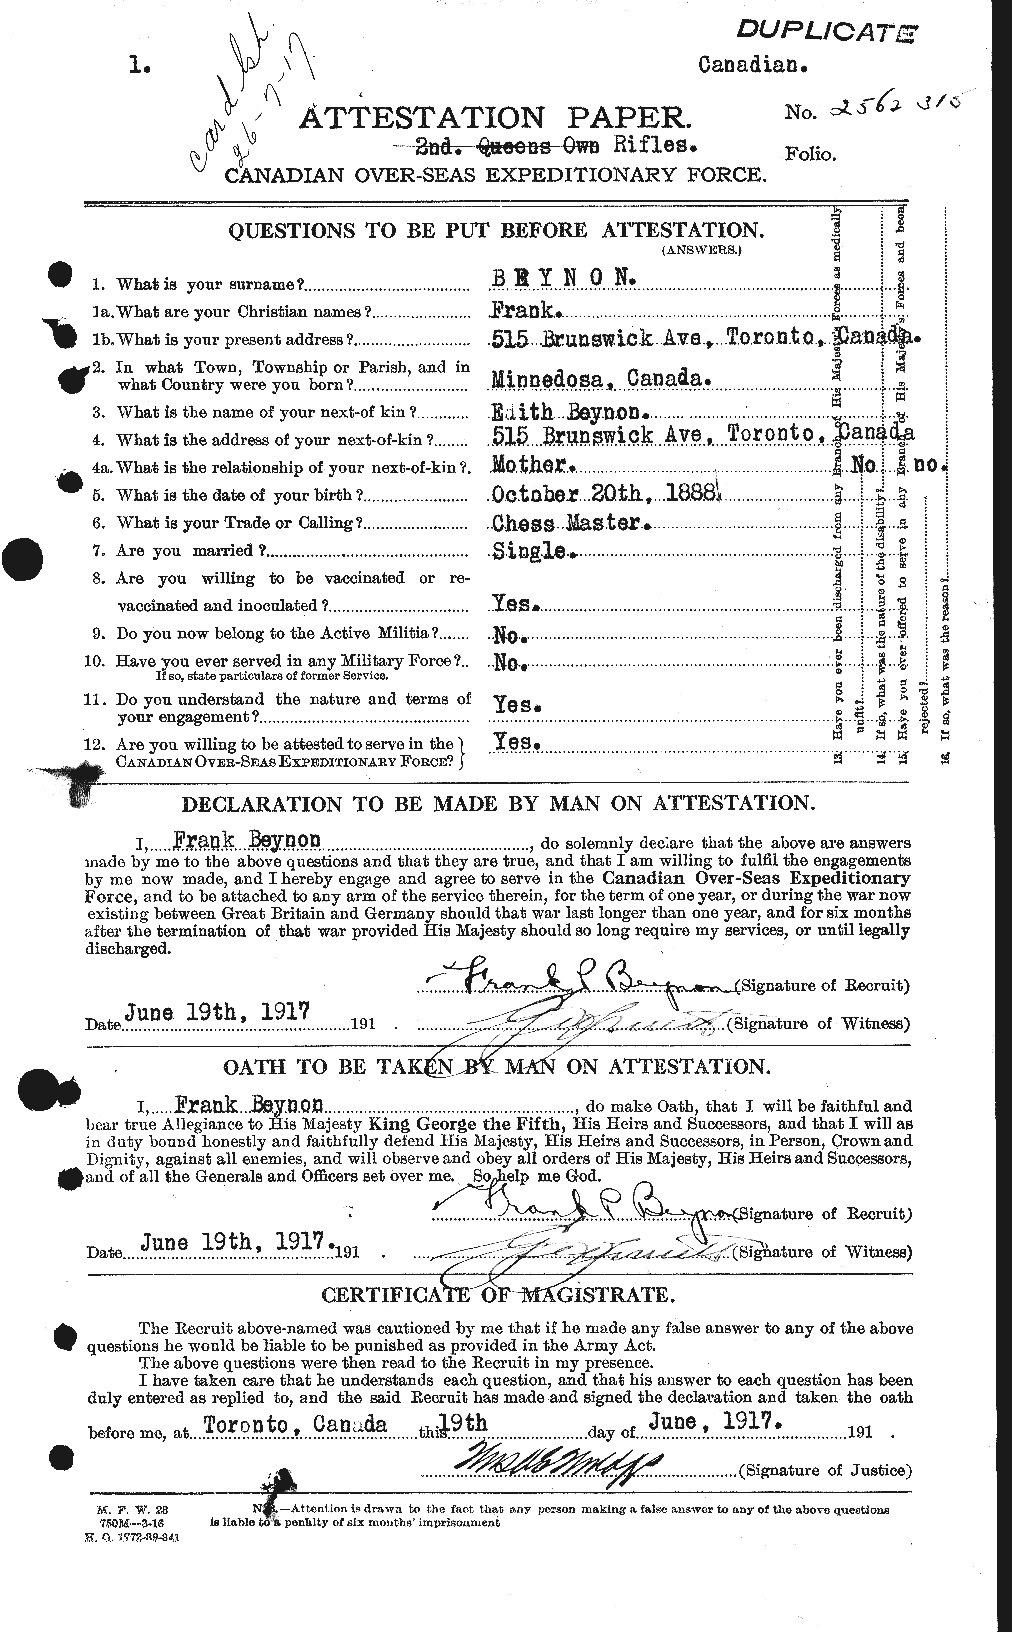 Personnel Records of the First World War - CEF 237507a